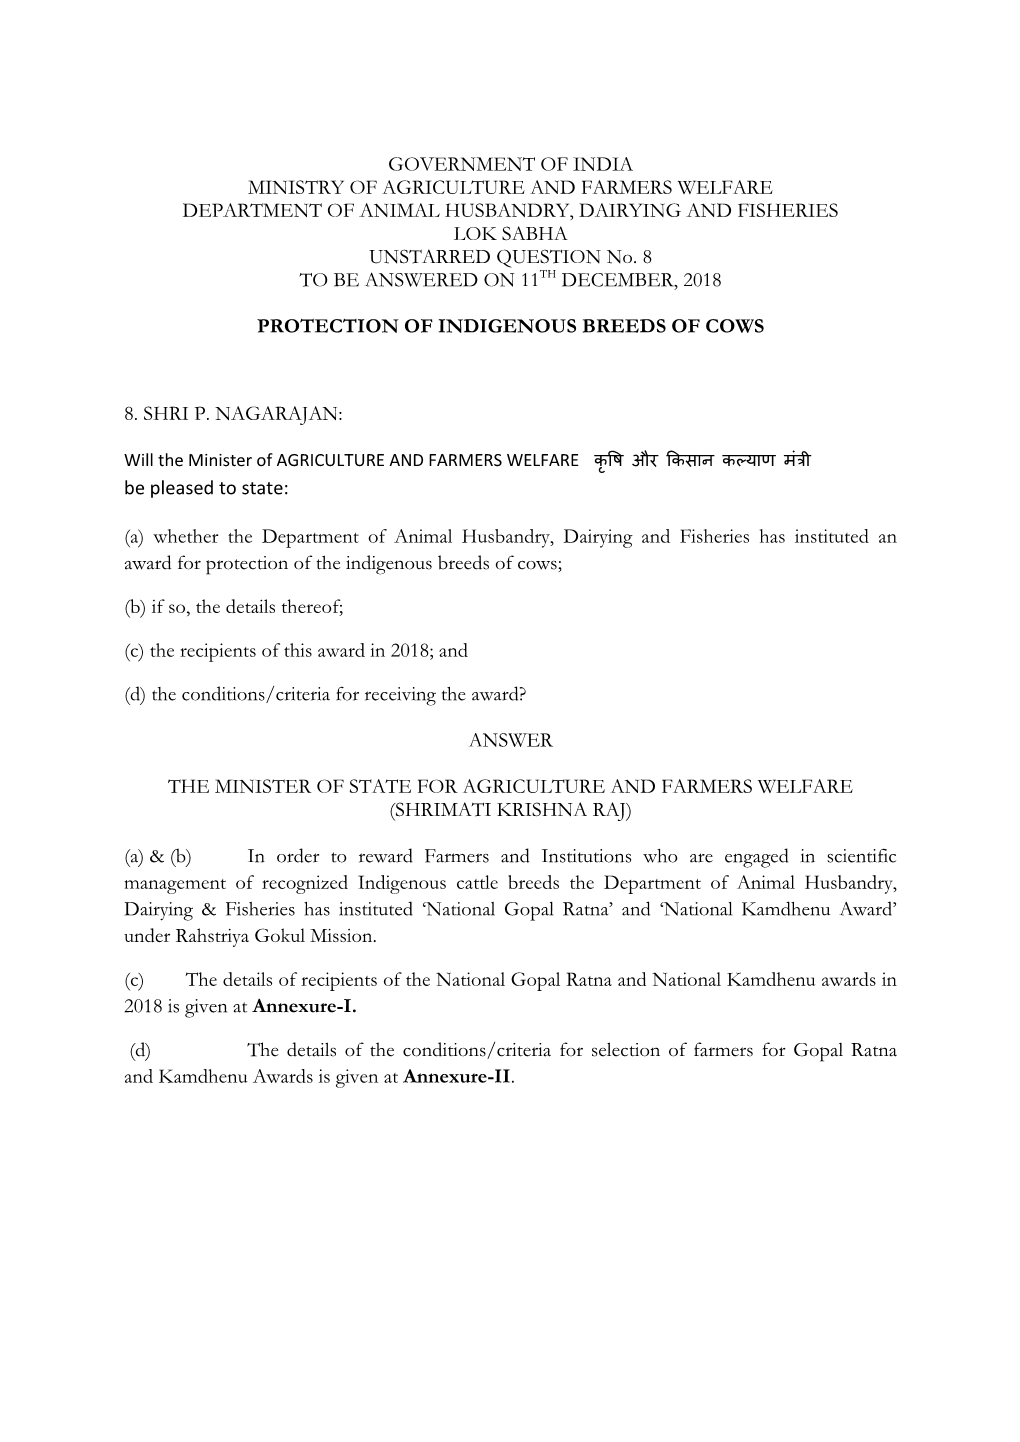 GOVERNMENT of INDIA MINISTRY of AGRICULTURE and FARMERS WELFARE DEPARTMENT of ANIMAL HUSBANDRY, DAIRYING and FISHERIES LOK SABHA UNSTARRED QUESTION No